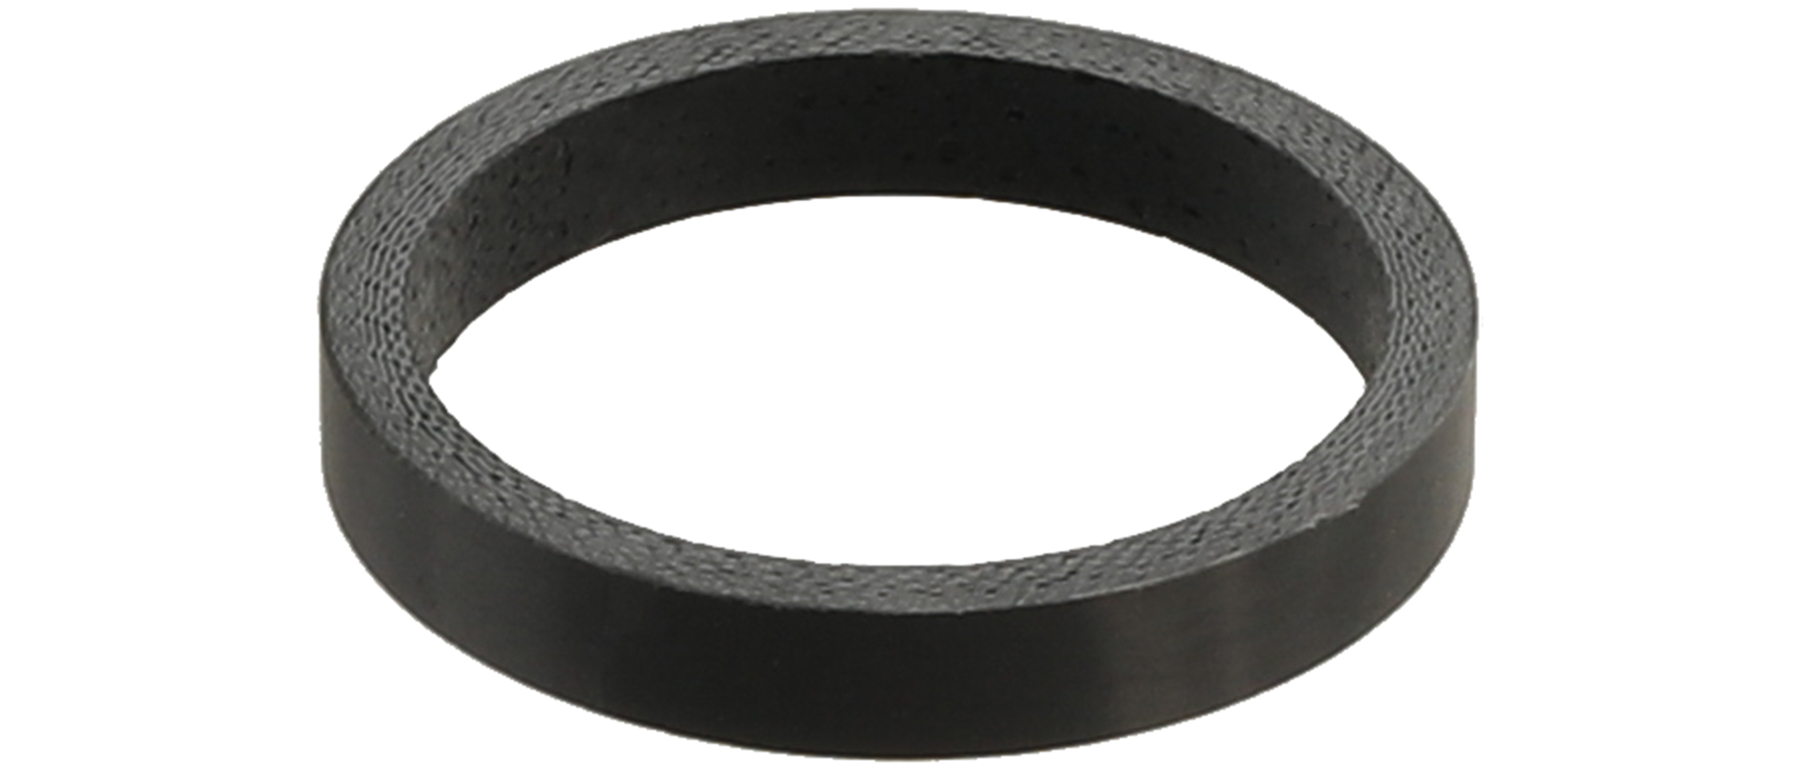 Wheels Manufacturing Carbon Headset Spacer